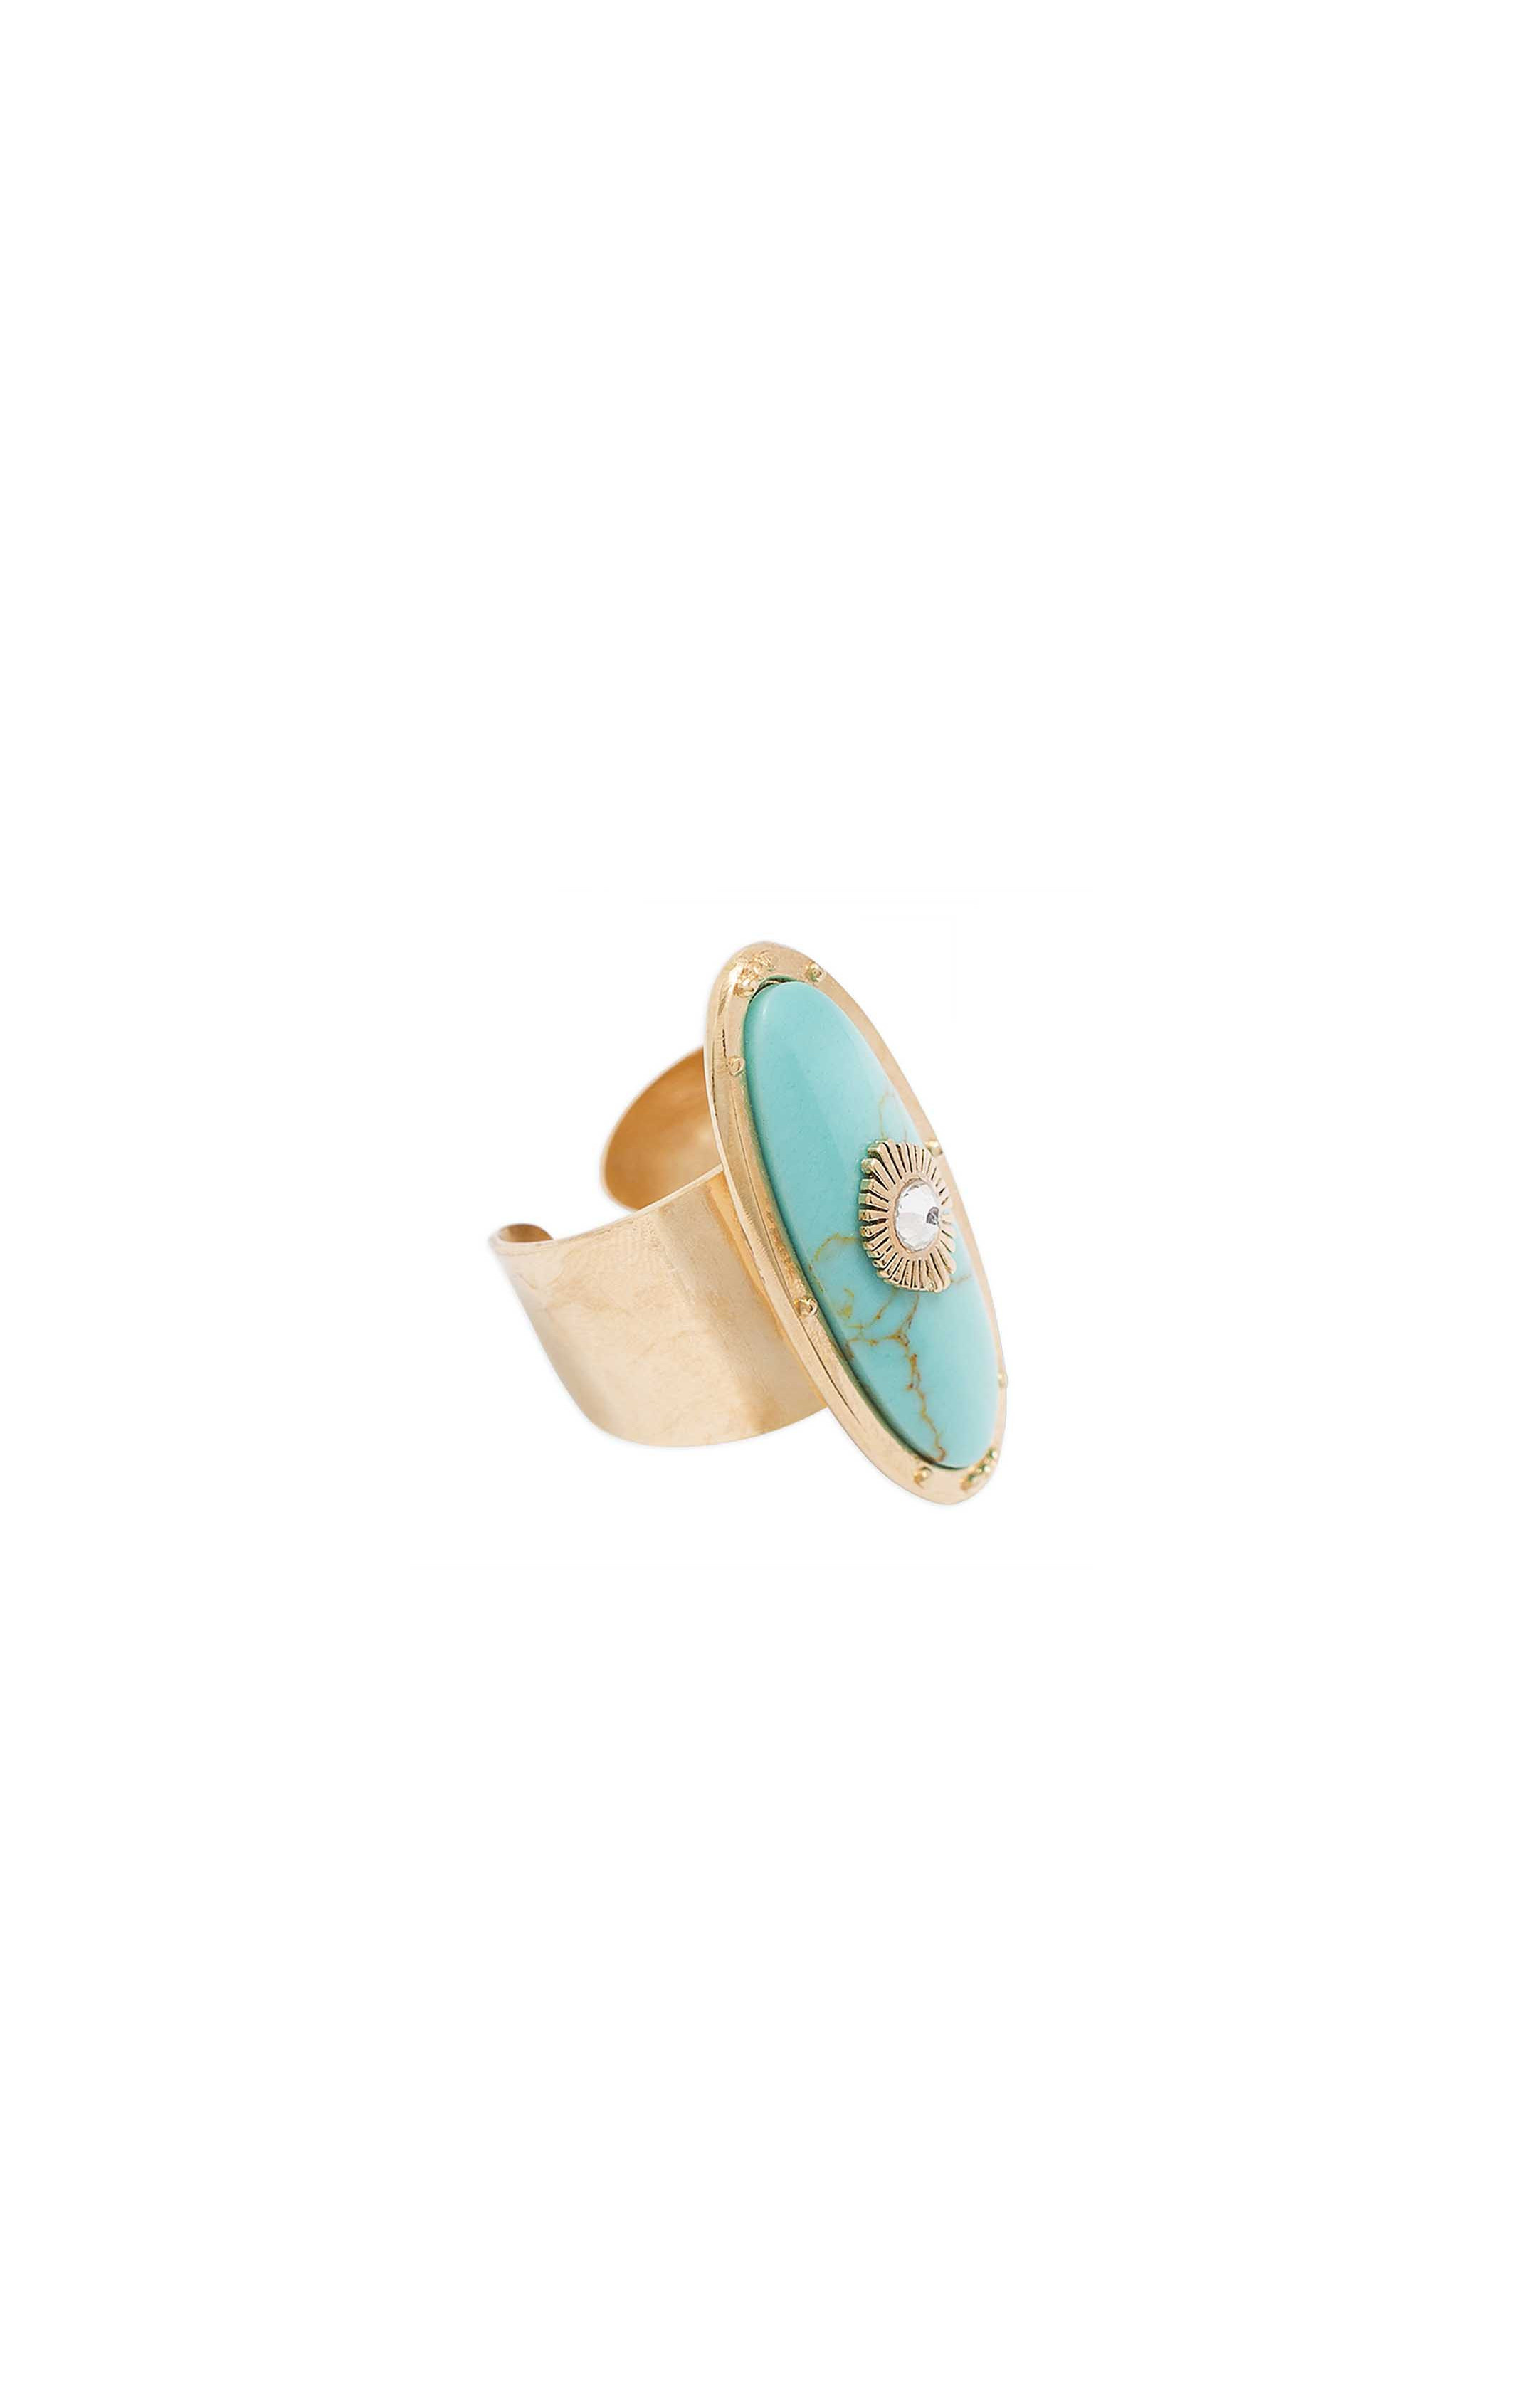 Ring Pacha Turquoise Turquoise